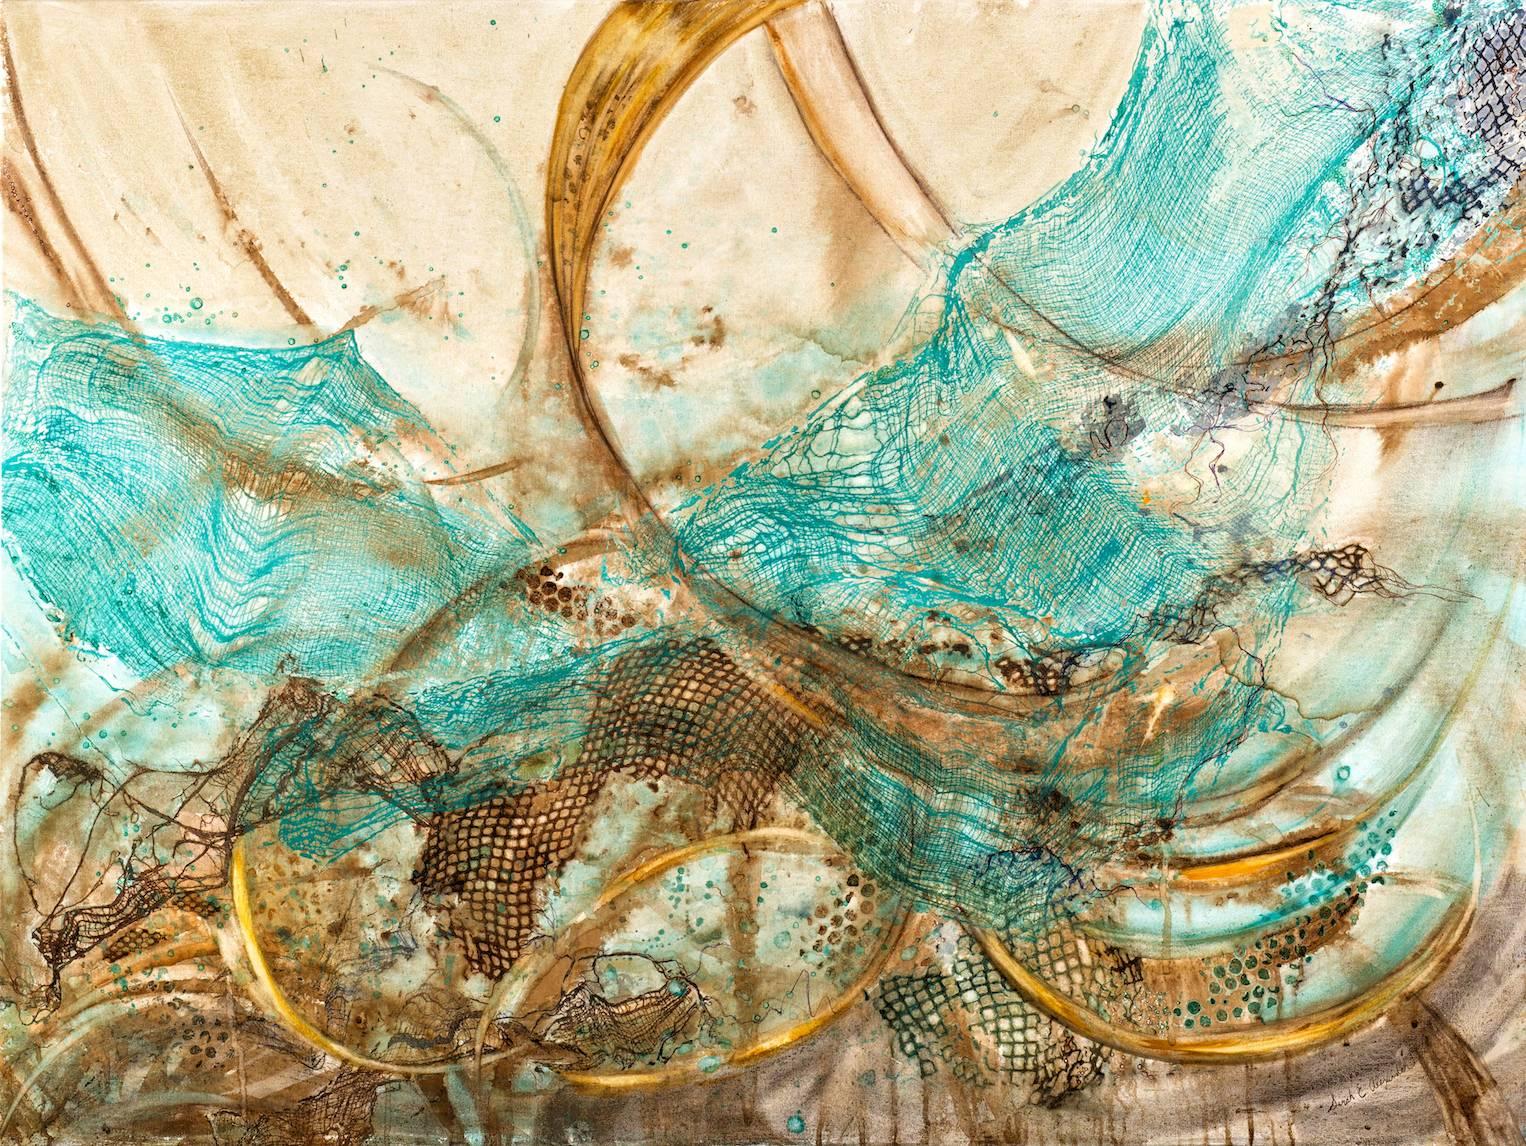 "Envelop", abstract, turquoise, browns, mixed media, watercolor, painting